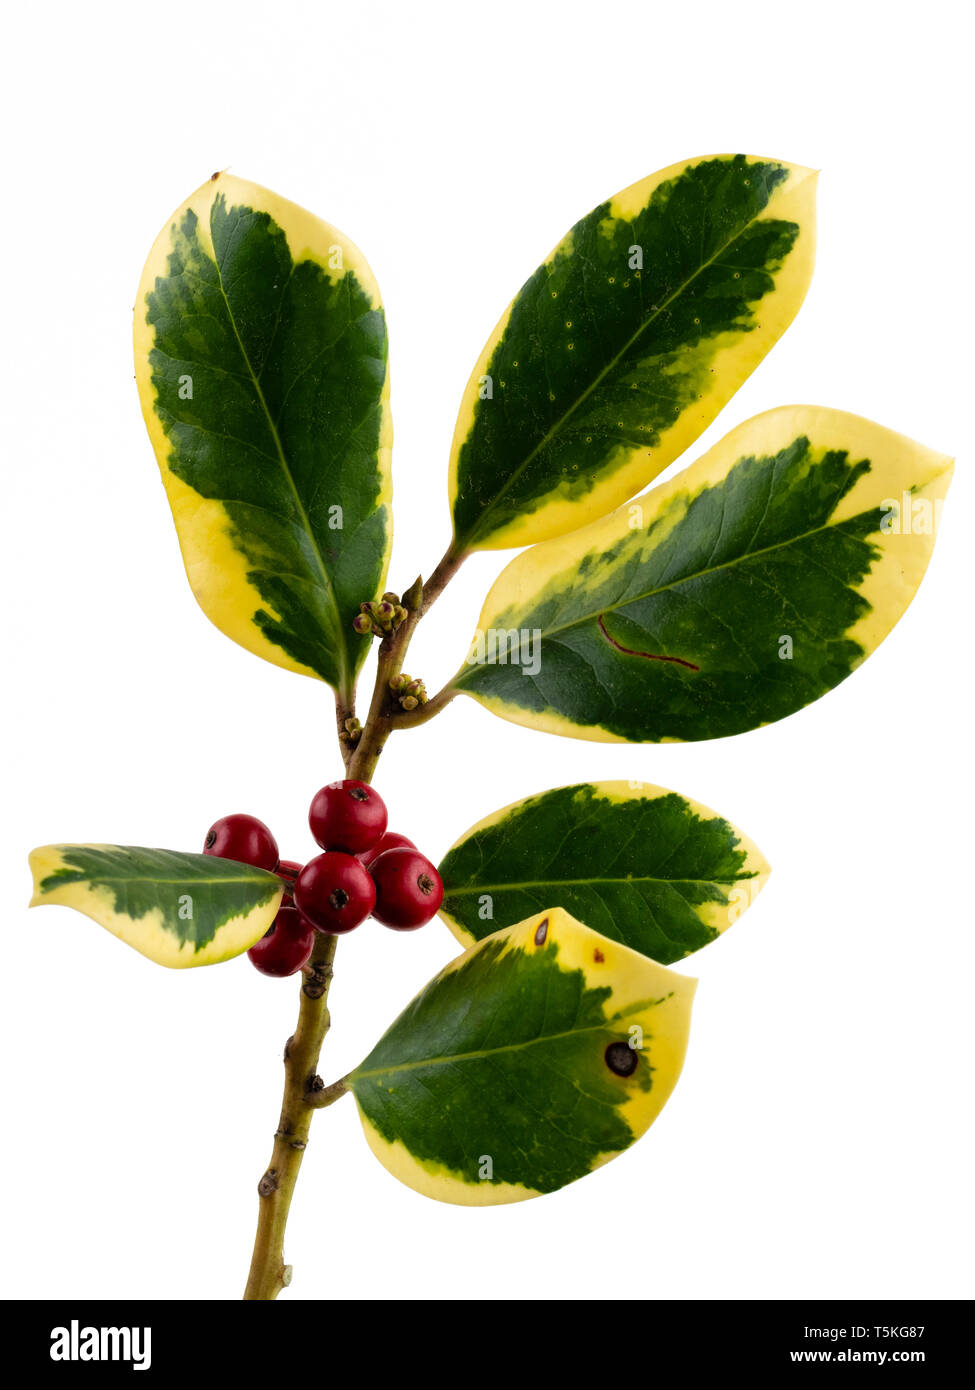 Red berries and yellow variegated evergreen foliage of the ornamental holly, Ilex x altaclerensis 'Golden King', on a white background Stock Photo